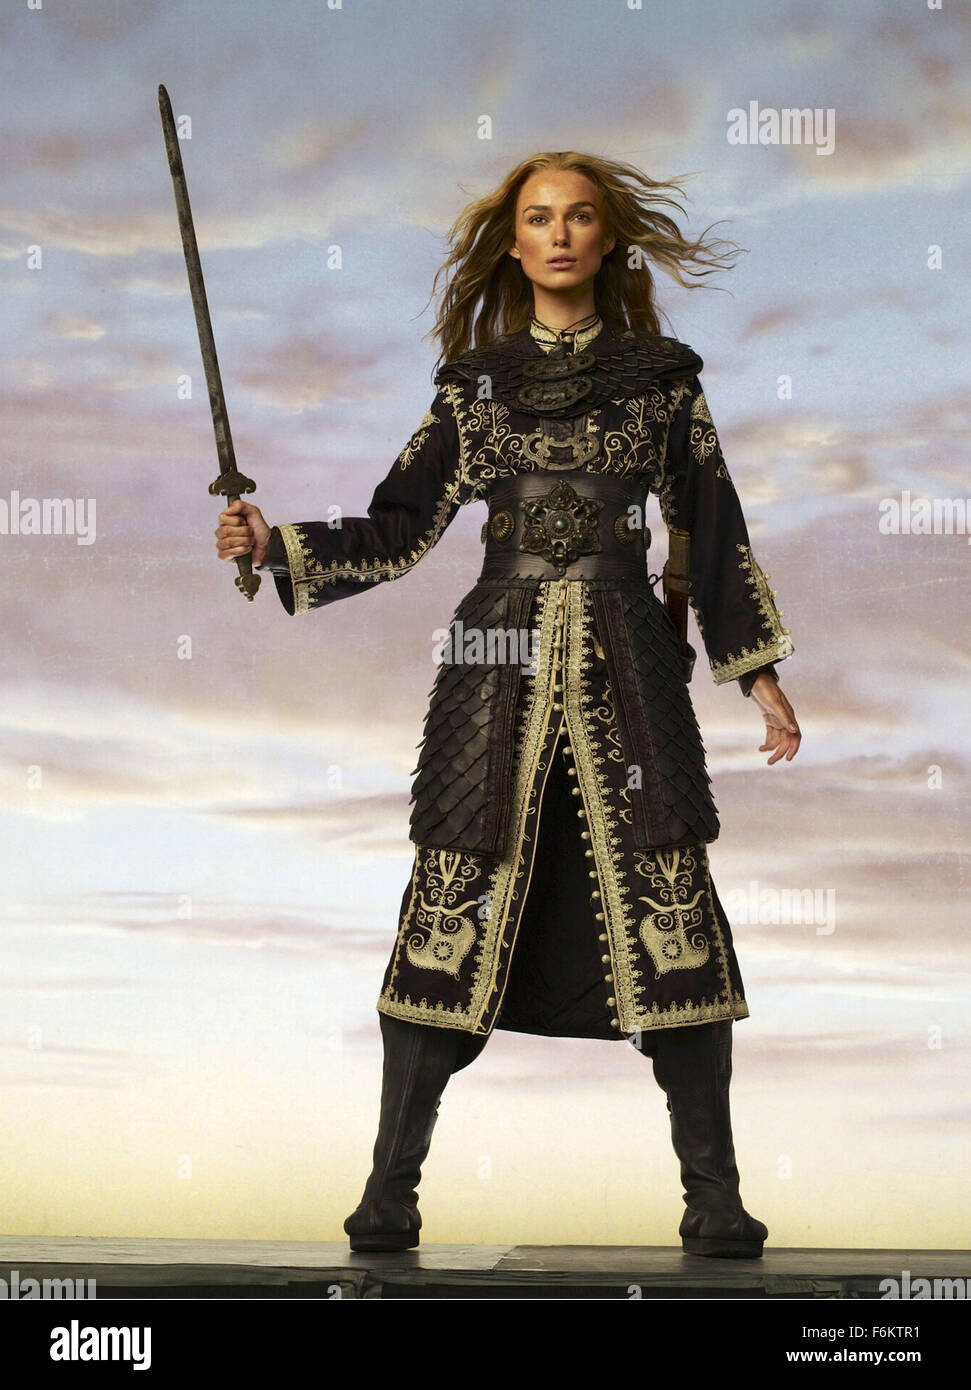 RELEASE DATE: May 25, 2007. STUDIO: Jerry Bruckheimer Films/Walt Disney Pictures. PLOT: Captain Barbossa, Will Turner and Elizabeth Swann must sail off the edge of the map, navigate treachery and betrayal, and make their final alliances for one last decisive battle. PICTURED: KEIRA KNIGHTLEY. Stock Photo